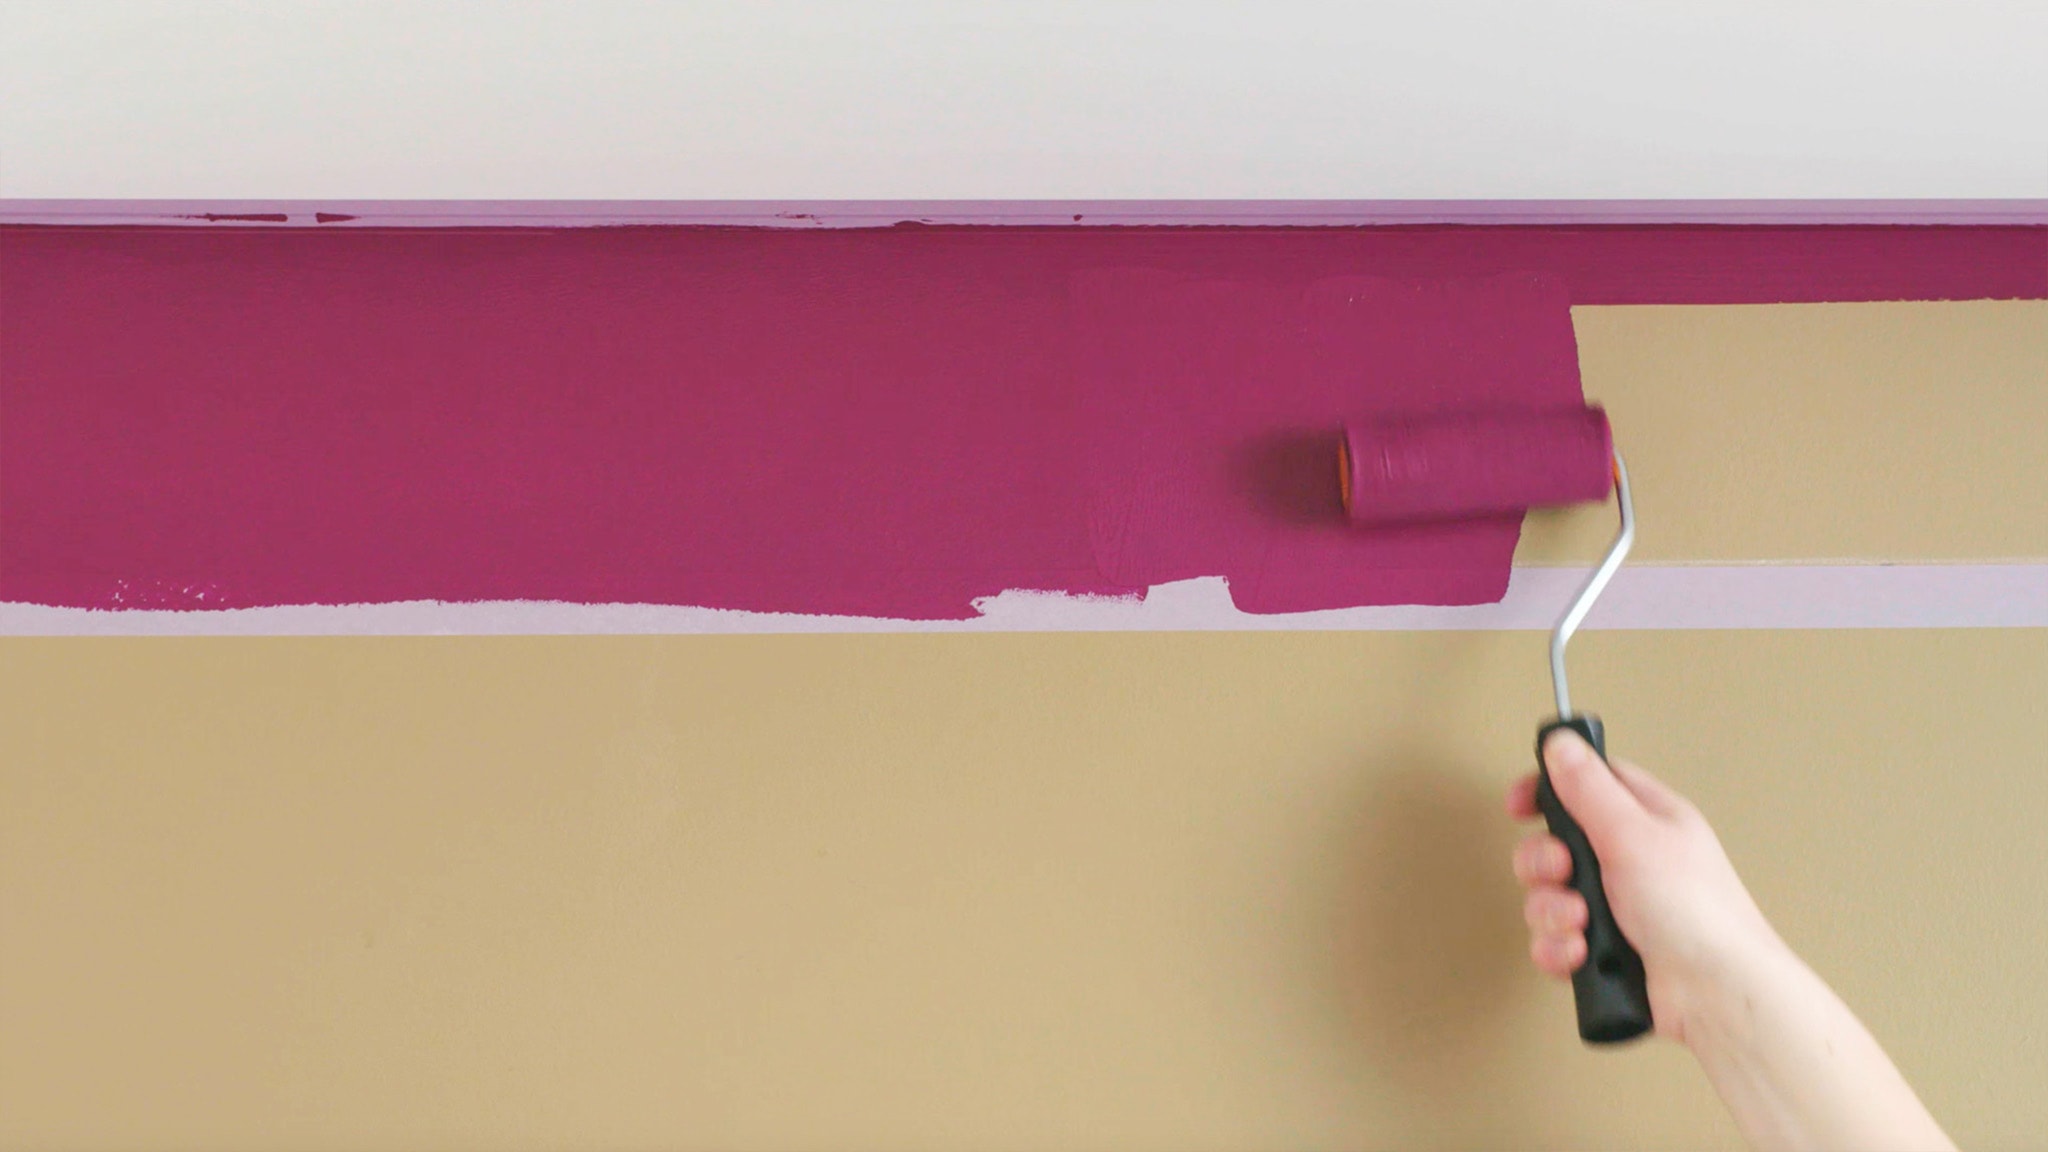 How To Paint A Ceiling Stripe In 5 Simple Steps Insert Brand Name